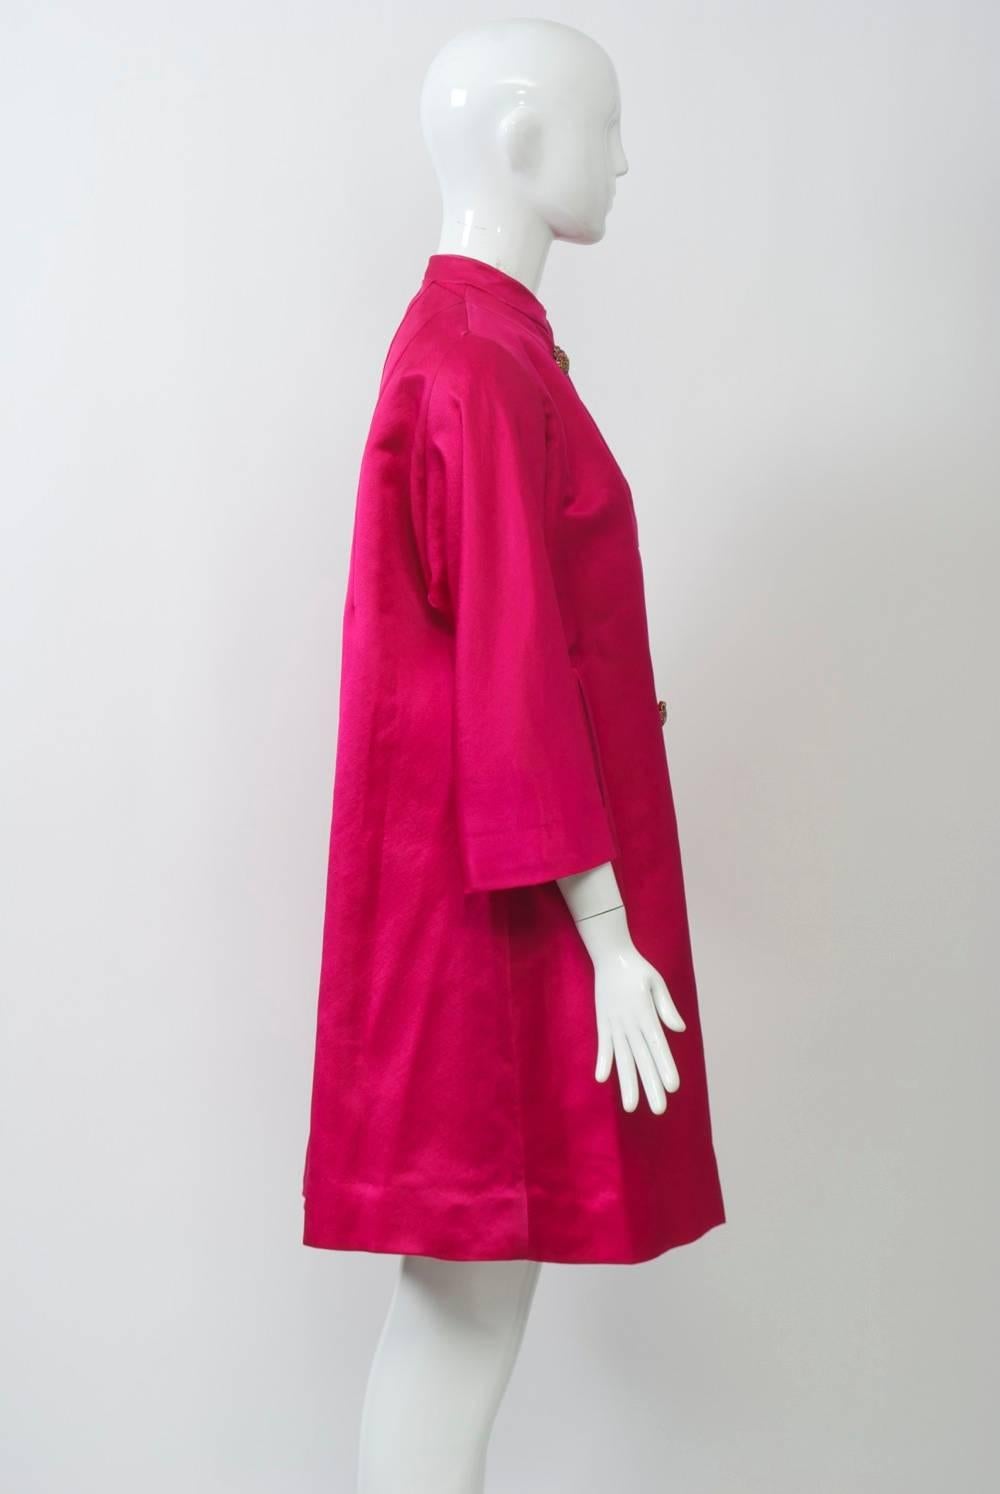 1960s silk evening coat in bright pink silk features an A-line profile with three-quarter sleeves and mandarin collar. Double-breasted, bound buttonholes with stone buttons and in inverted detailing at bust. Approximate size 6-8.

